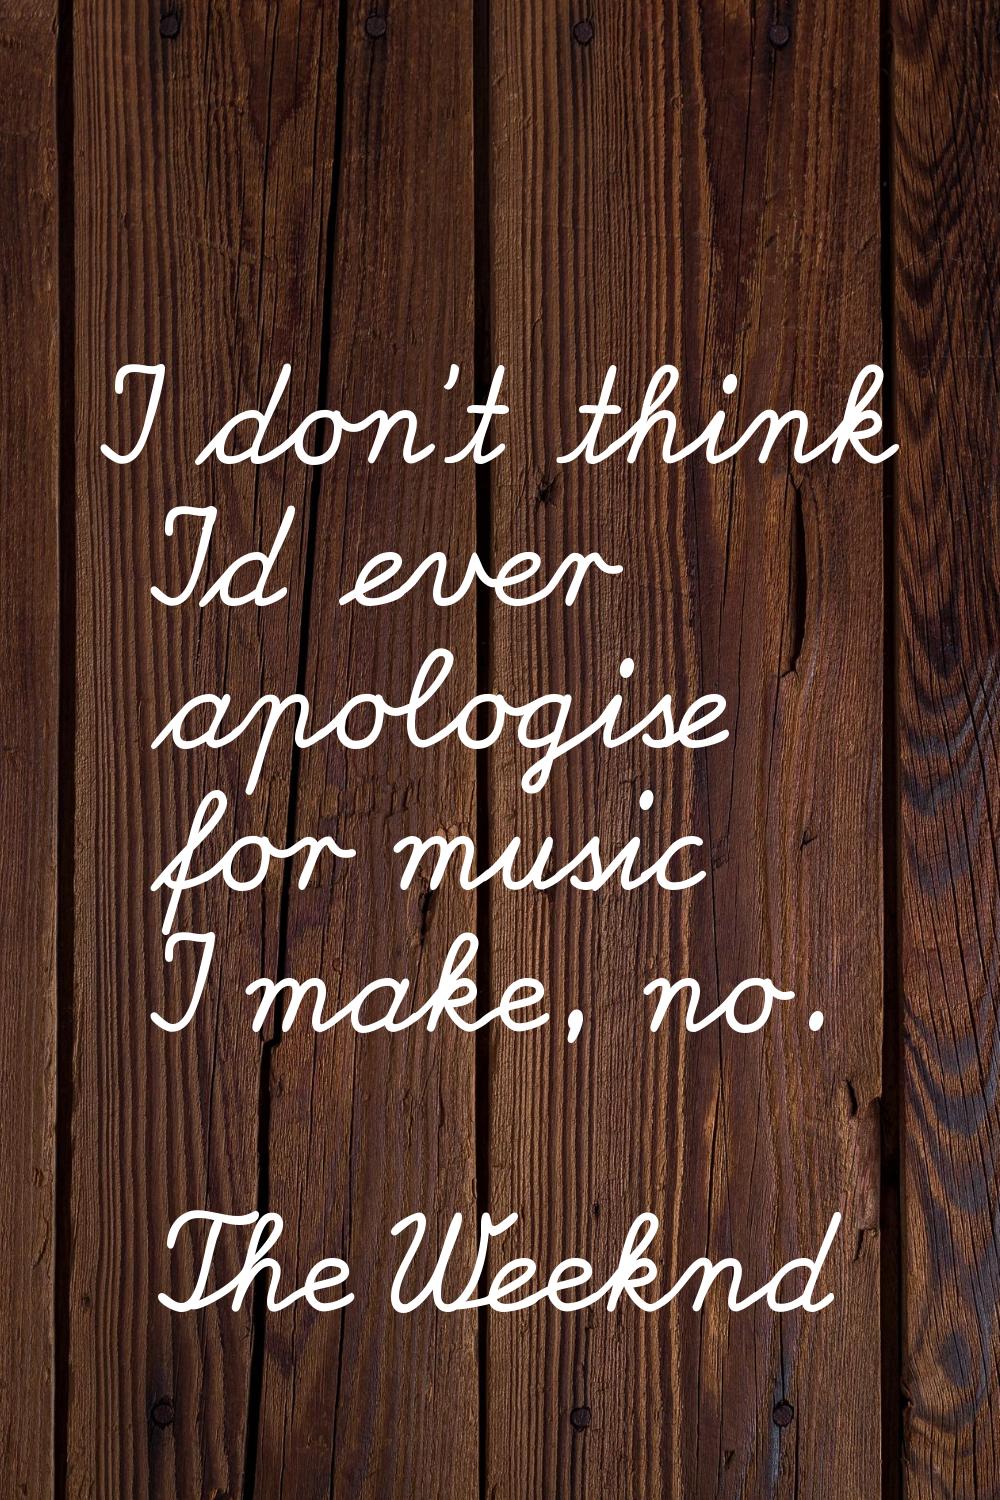 I don't think I'd ever apologise for music I make, no.